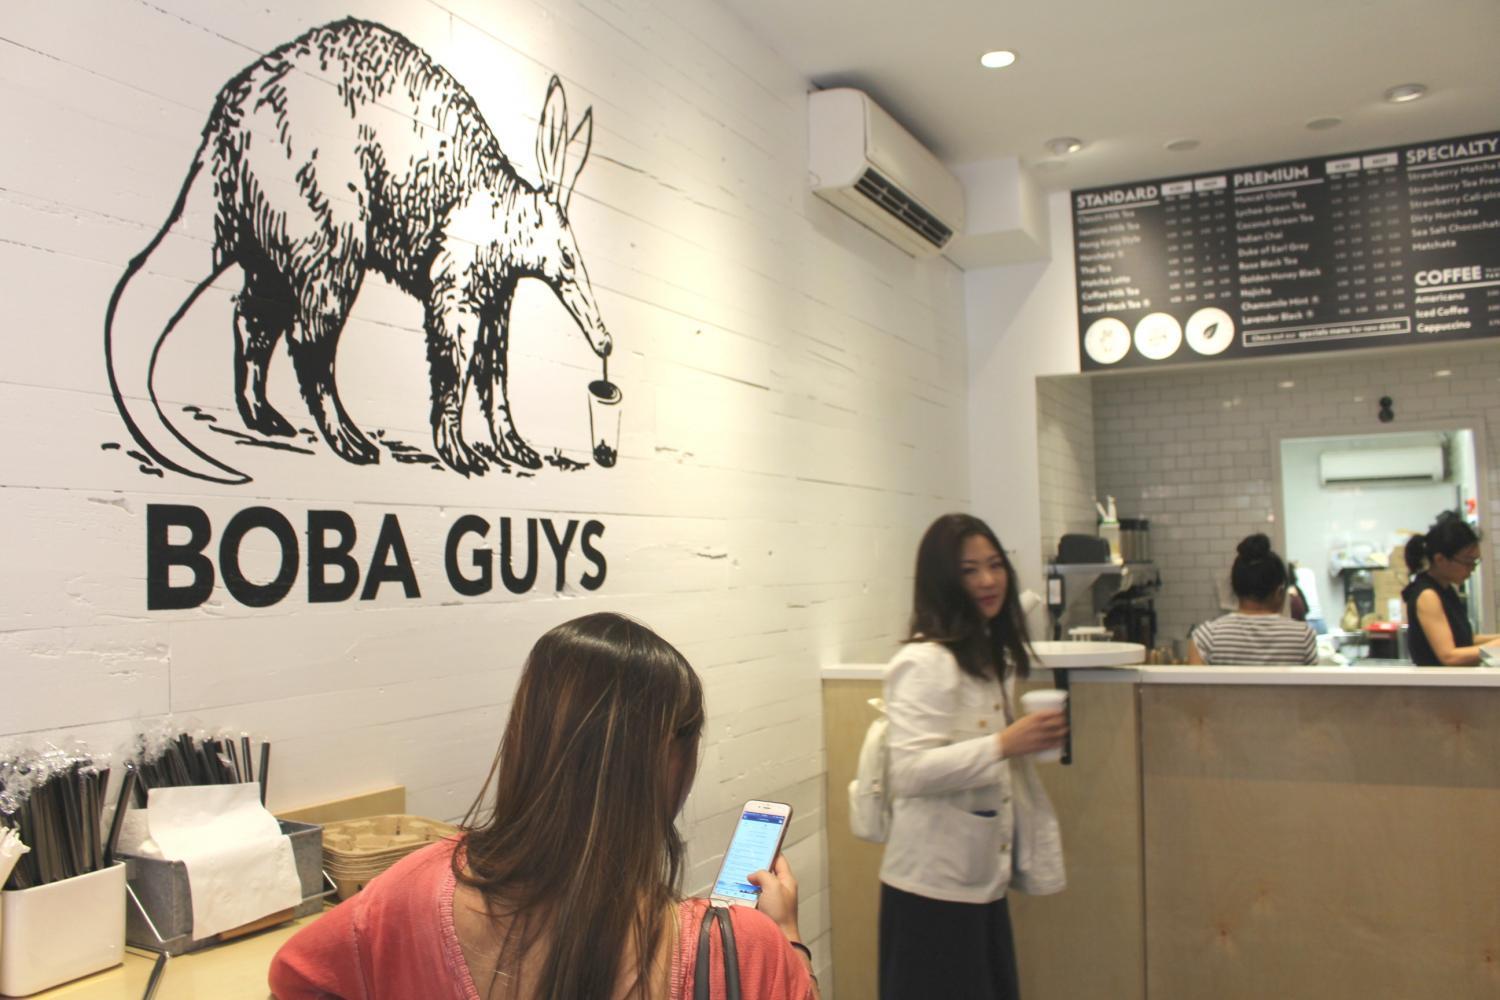 Boba Guys is a favorite among students to get bubble tea near campus, stocked with classics as well as adventurous flavors.